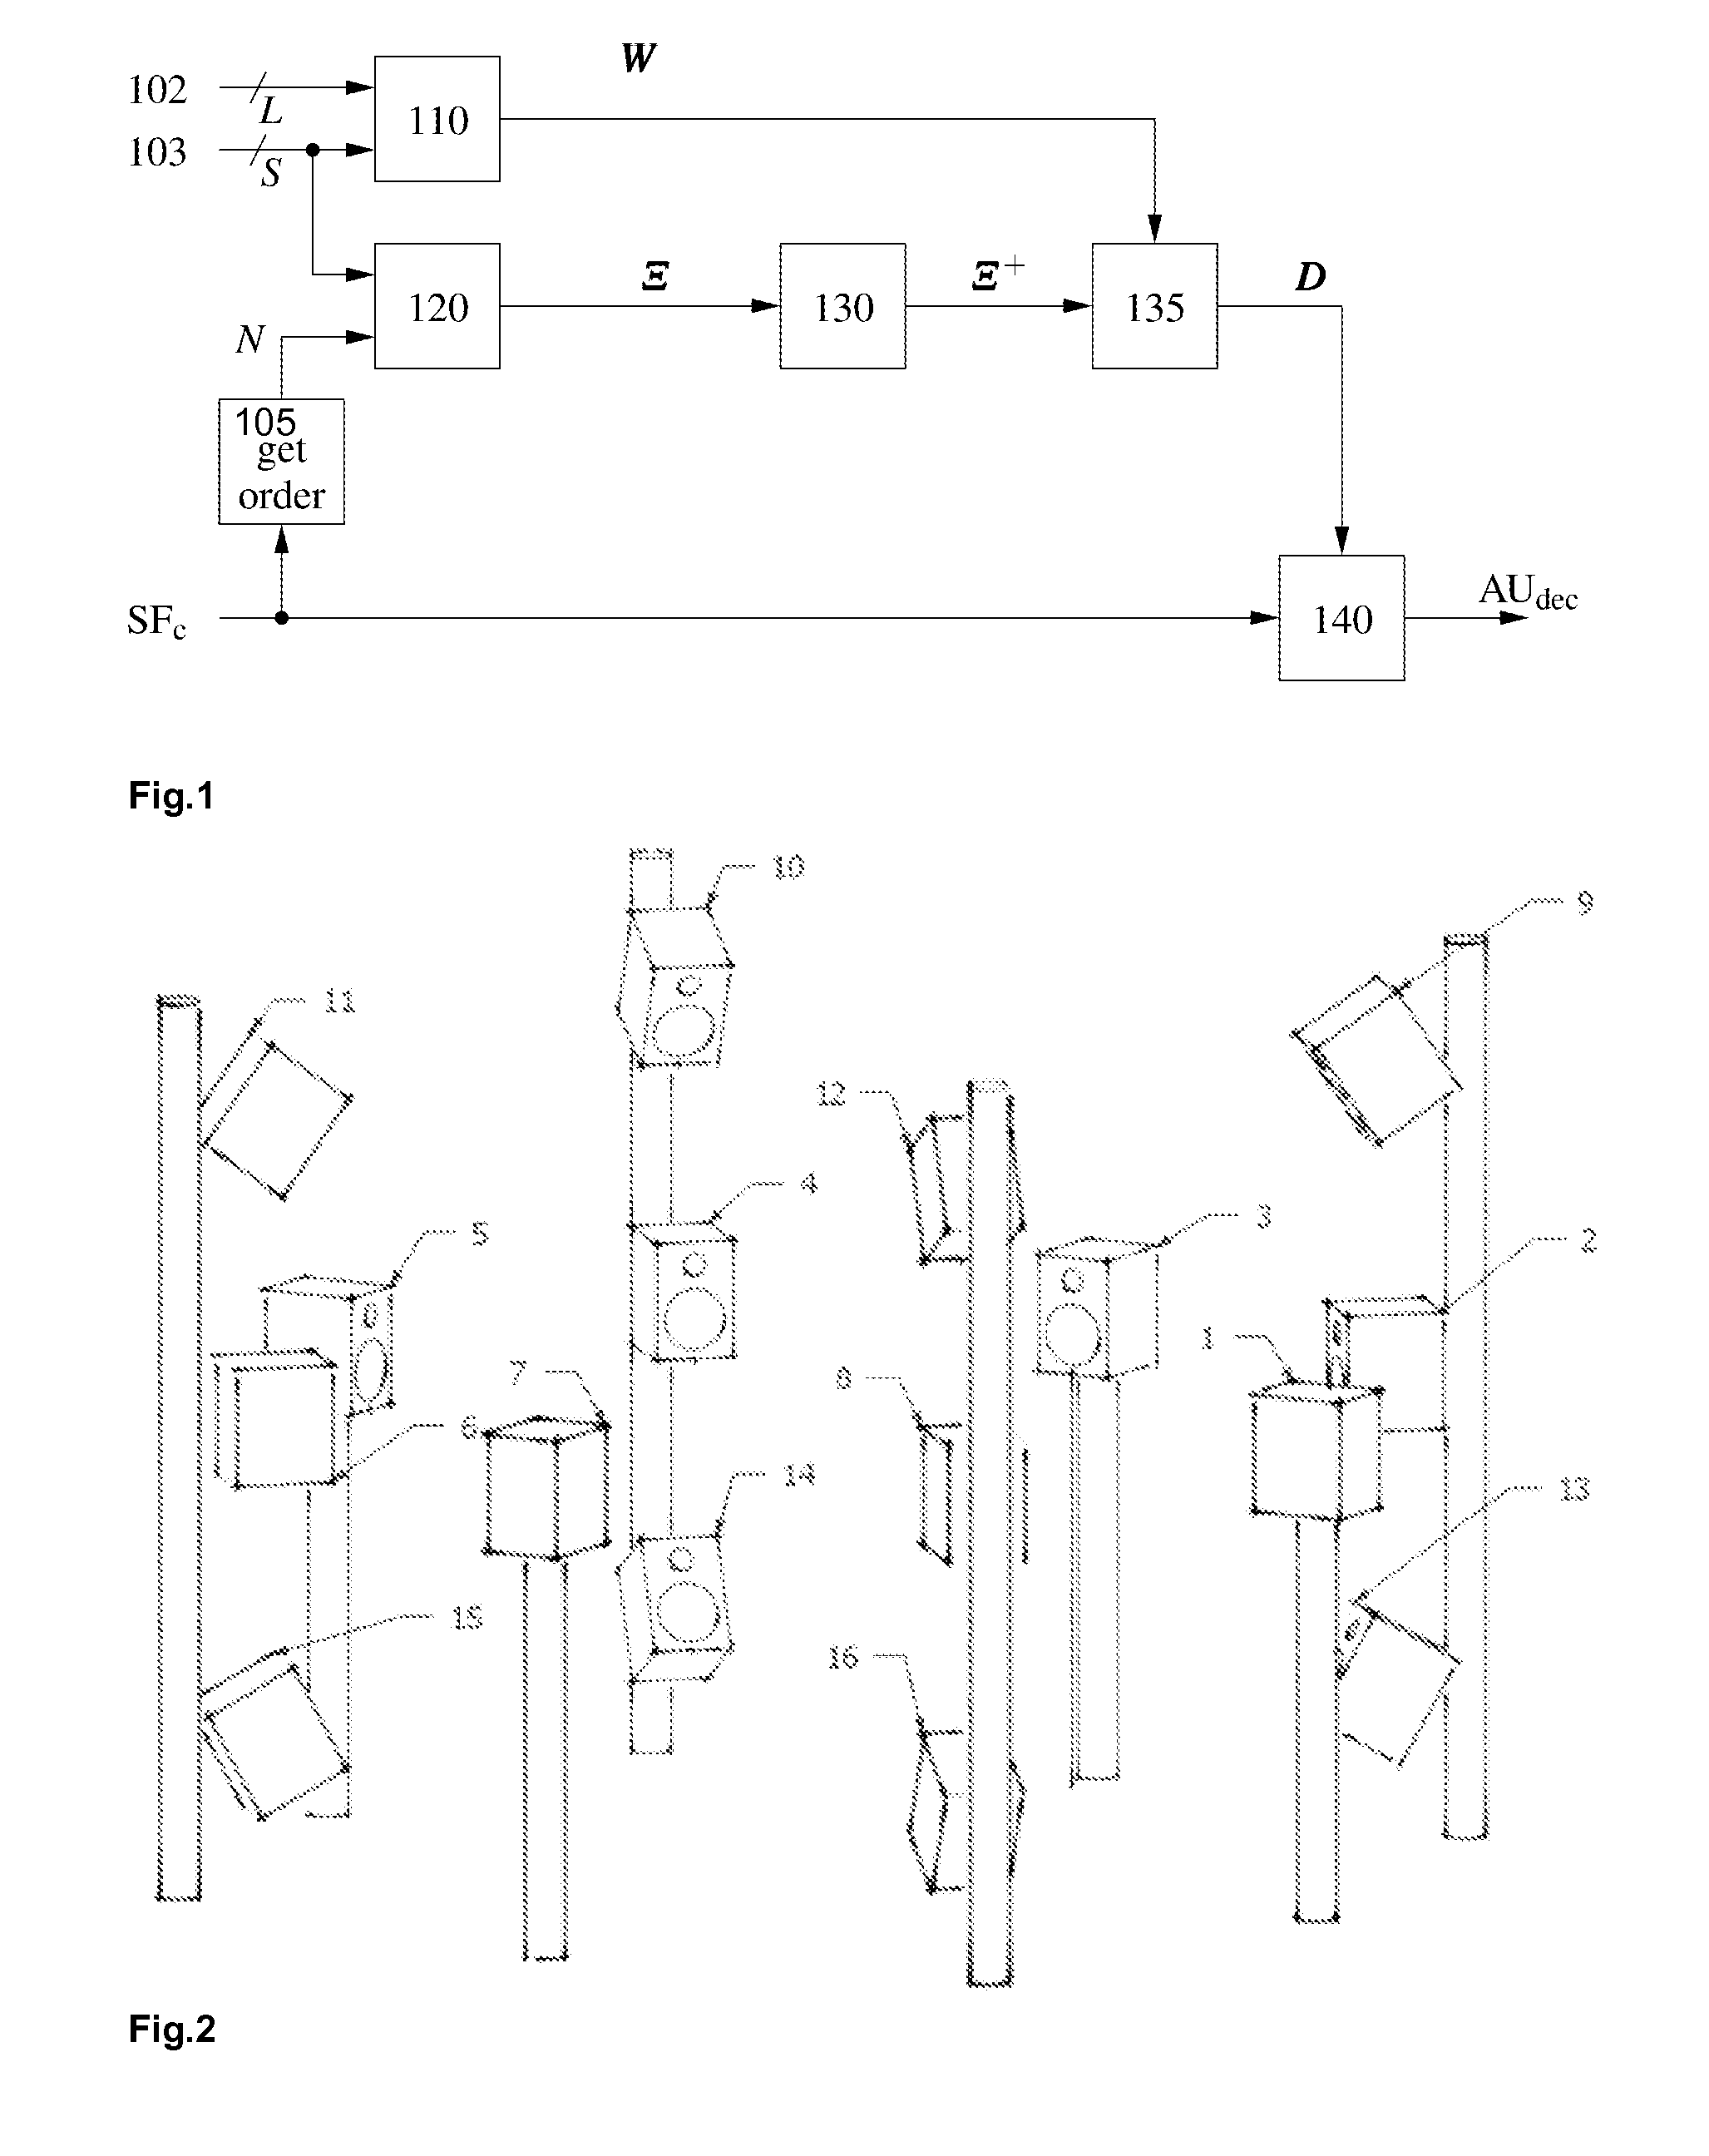 Method and device for decoding an audio soundfield representation for audio playback